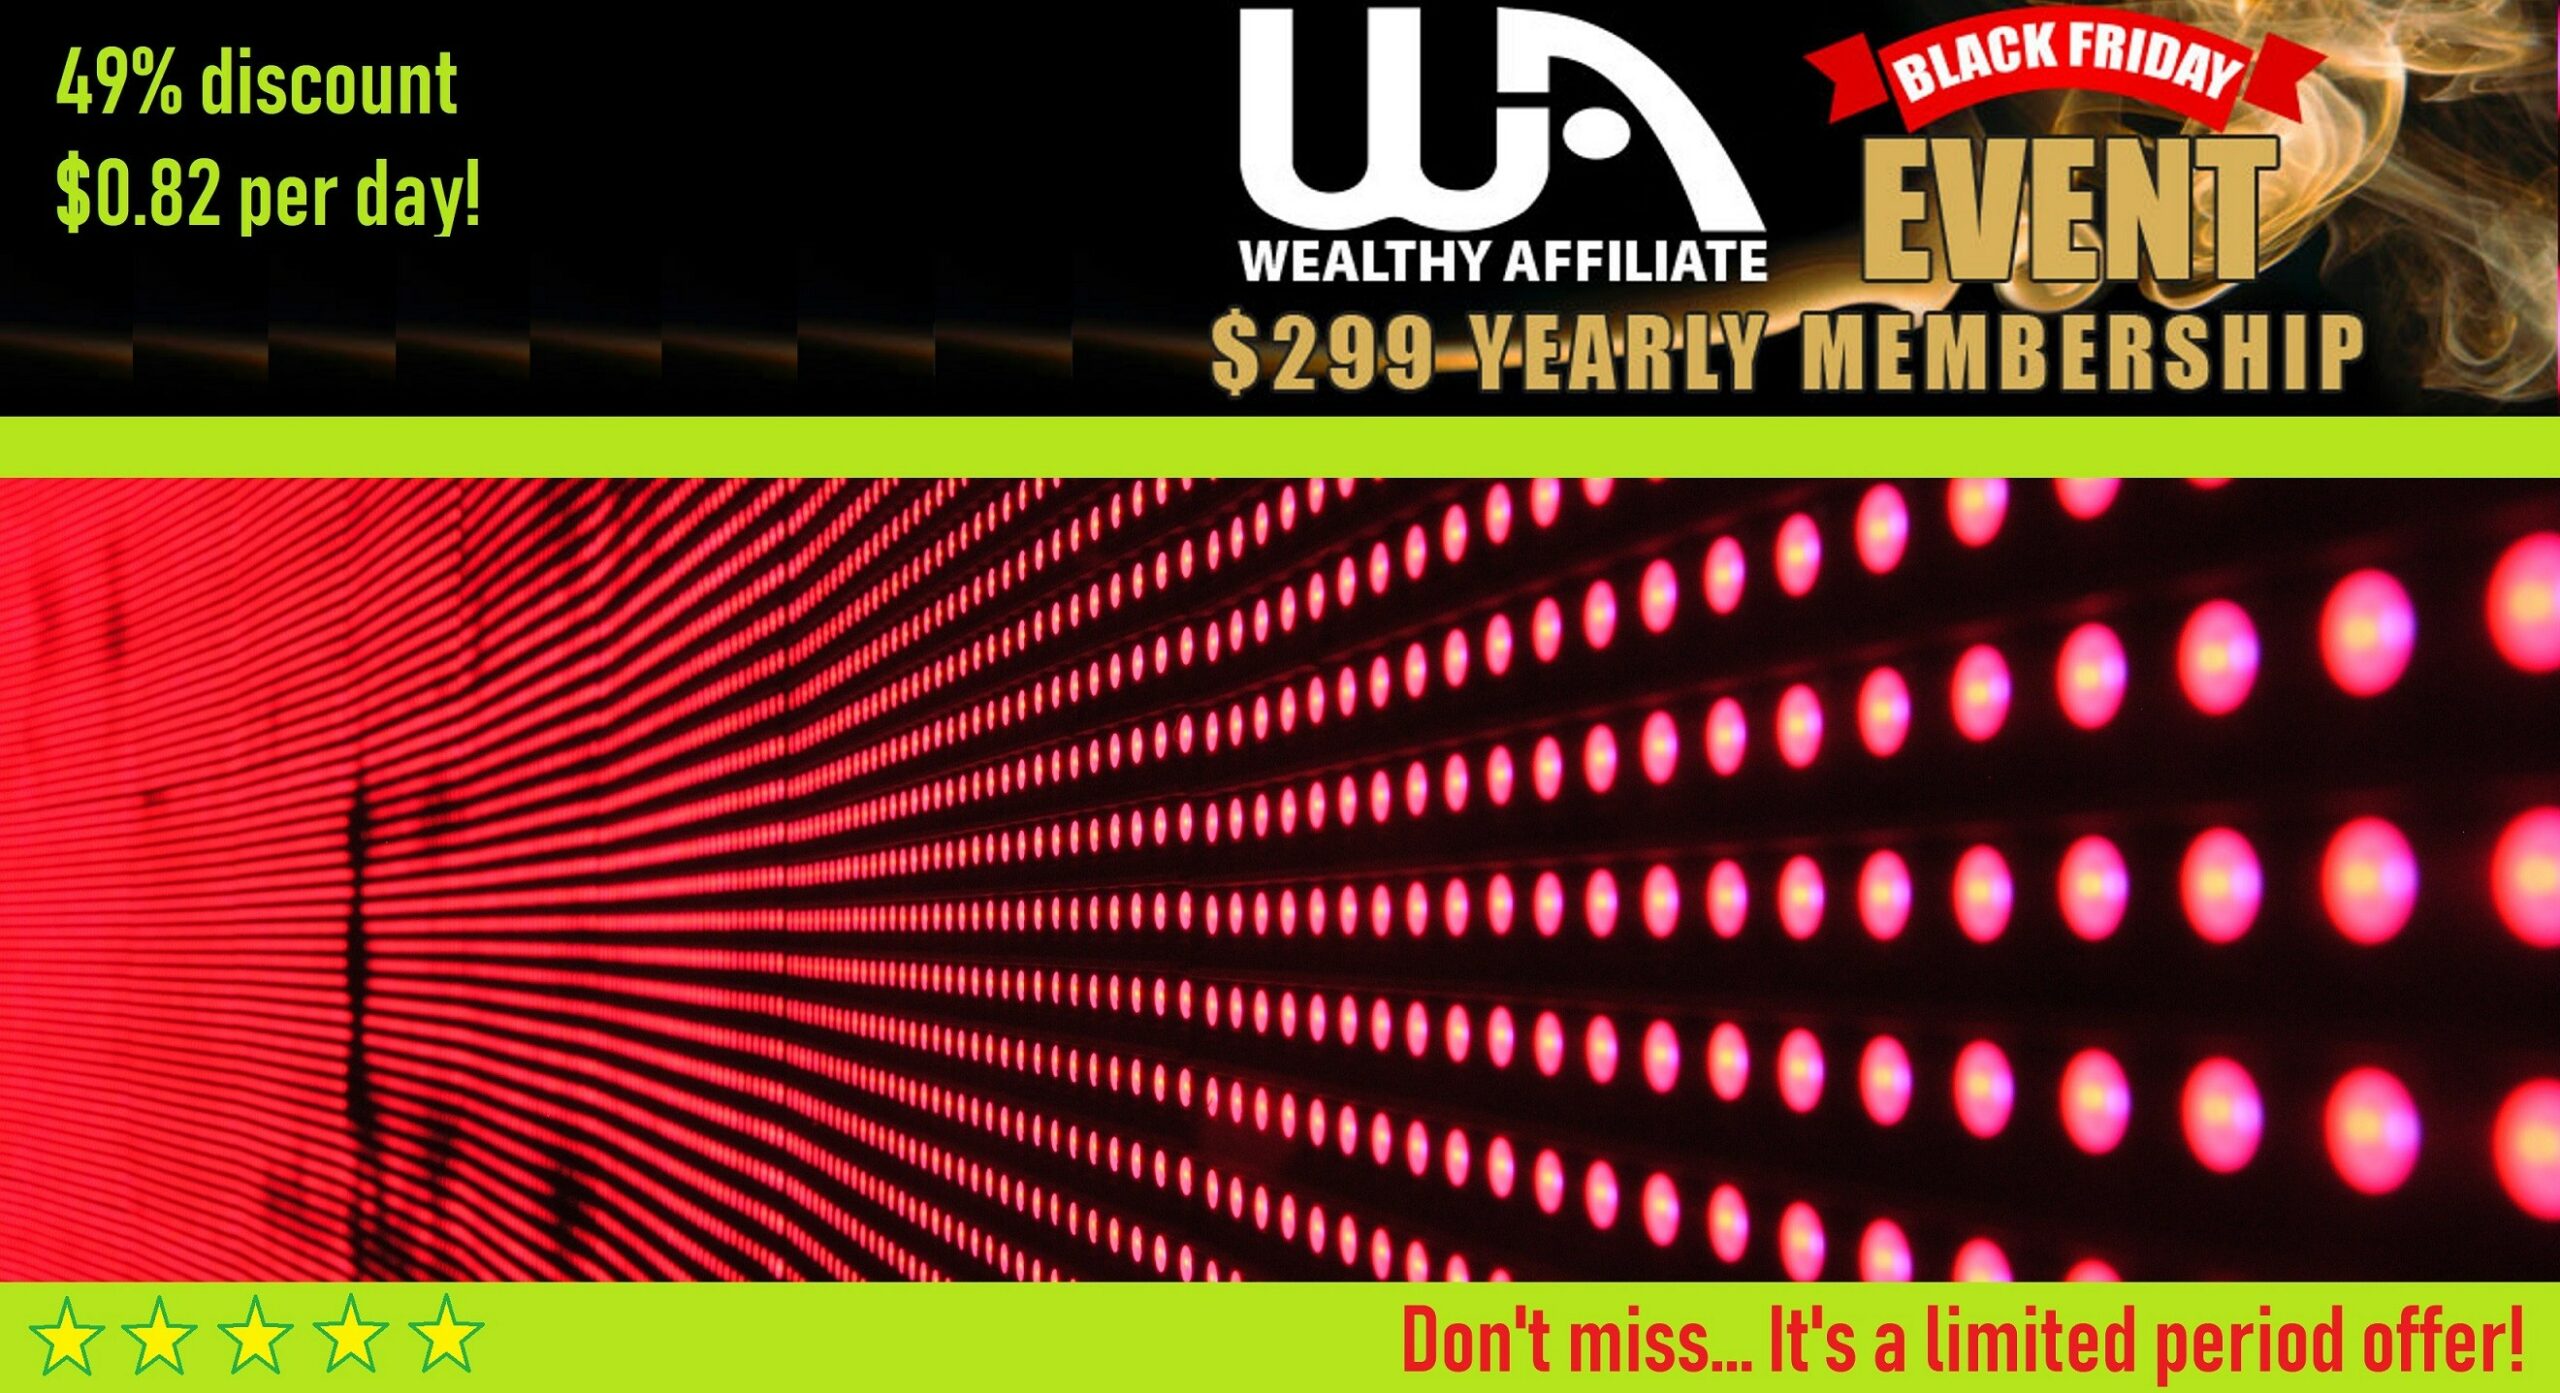 Wealthy Affiliate and the Black Friday